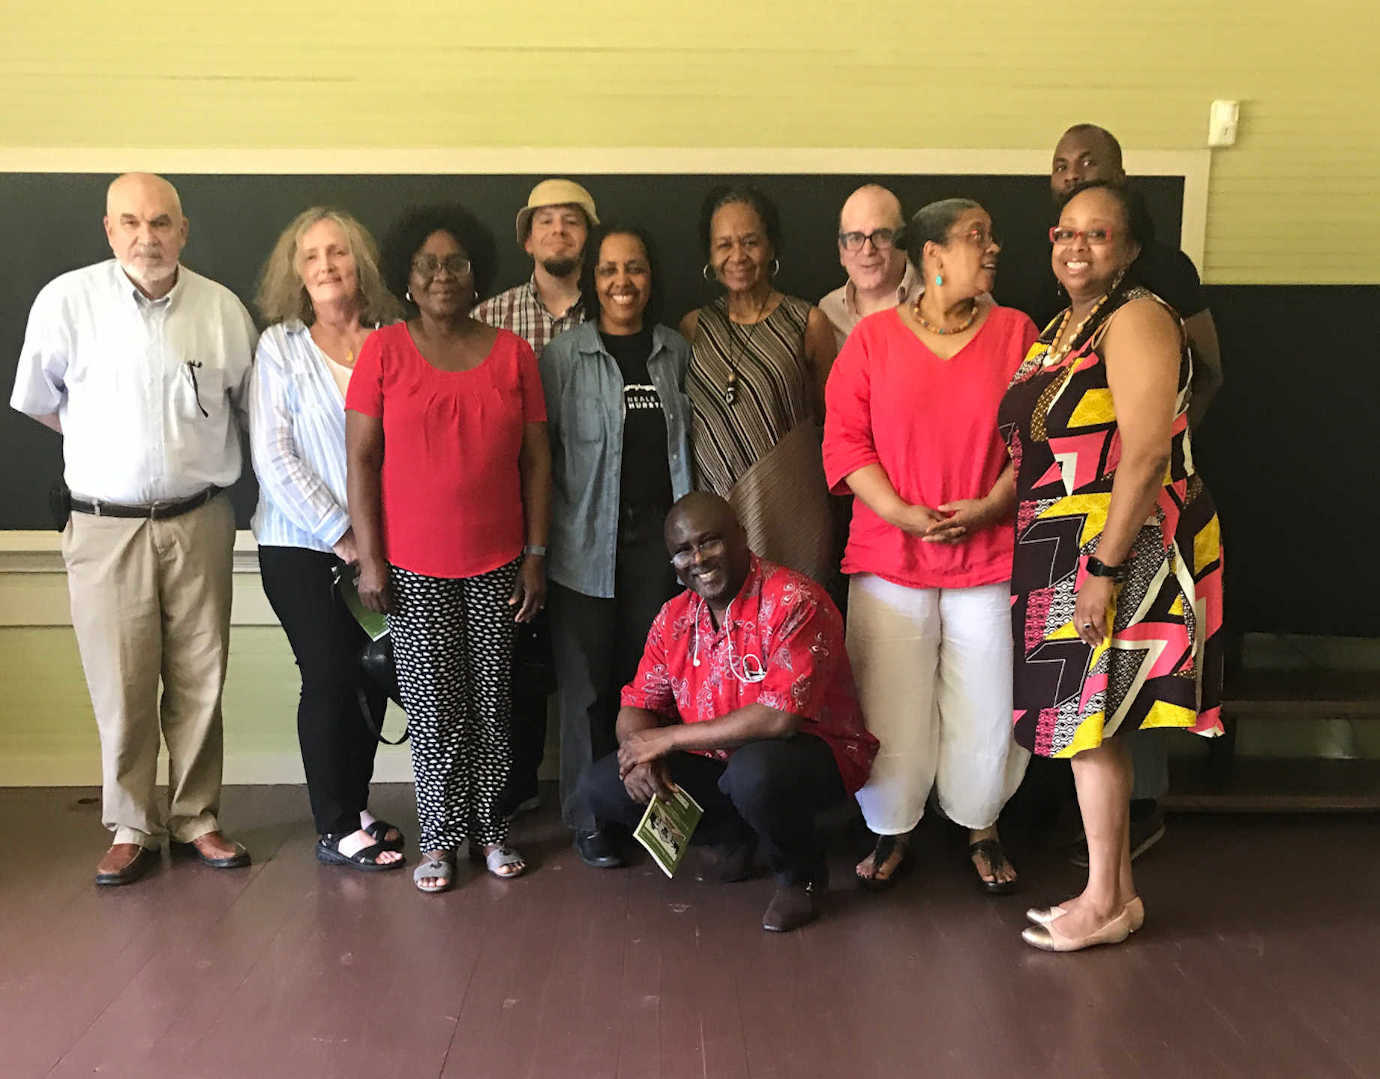 Part of the faculty workshop included learning from an a contracted consultant at the Rosenwald School in Notasulga, one of the six initial schools established in Zora Neale Hurston's hometown by the Rosenwald Fund to provide education to African American children. Image courtesy of Tuskegee University.